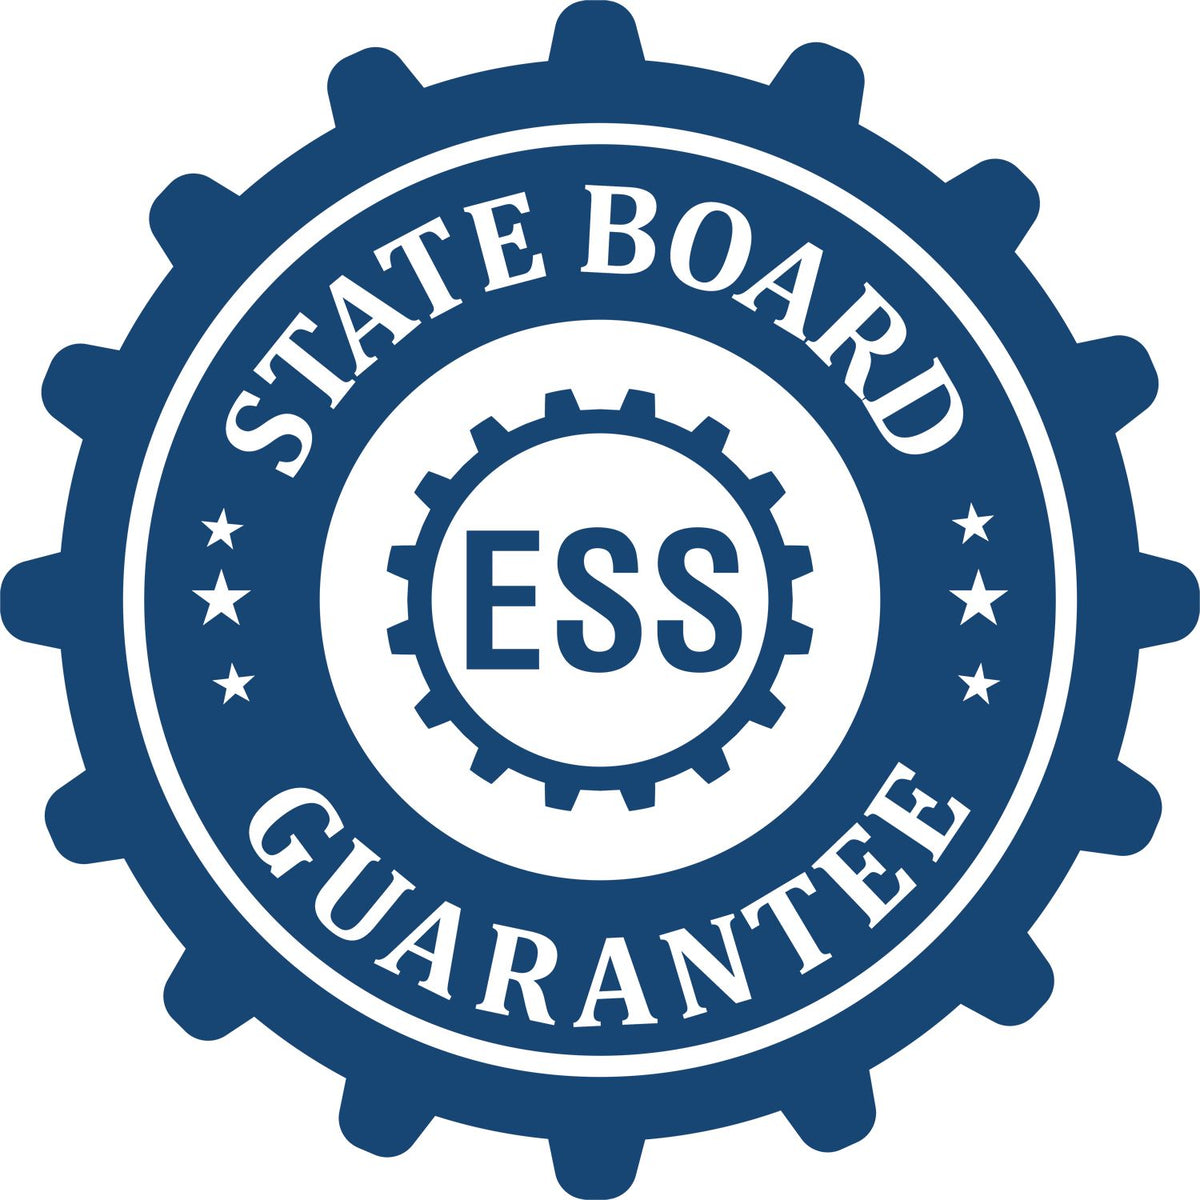 An emblem in a gear shape illustrating a state board guarantee for the Digital Tennessee Landscape Architect Stamp product.